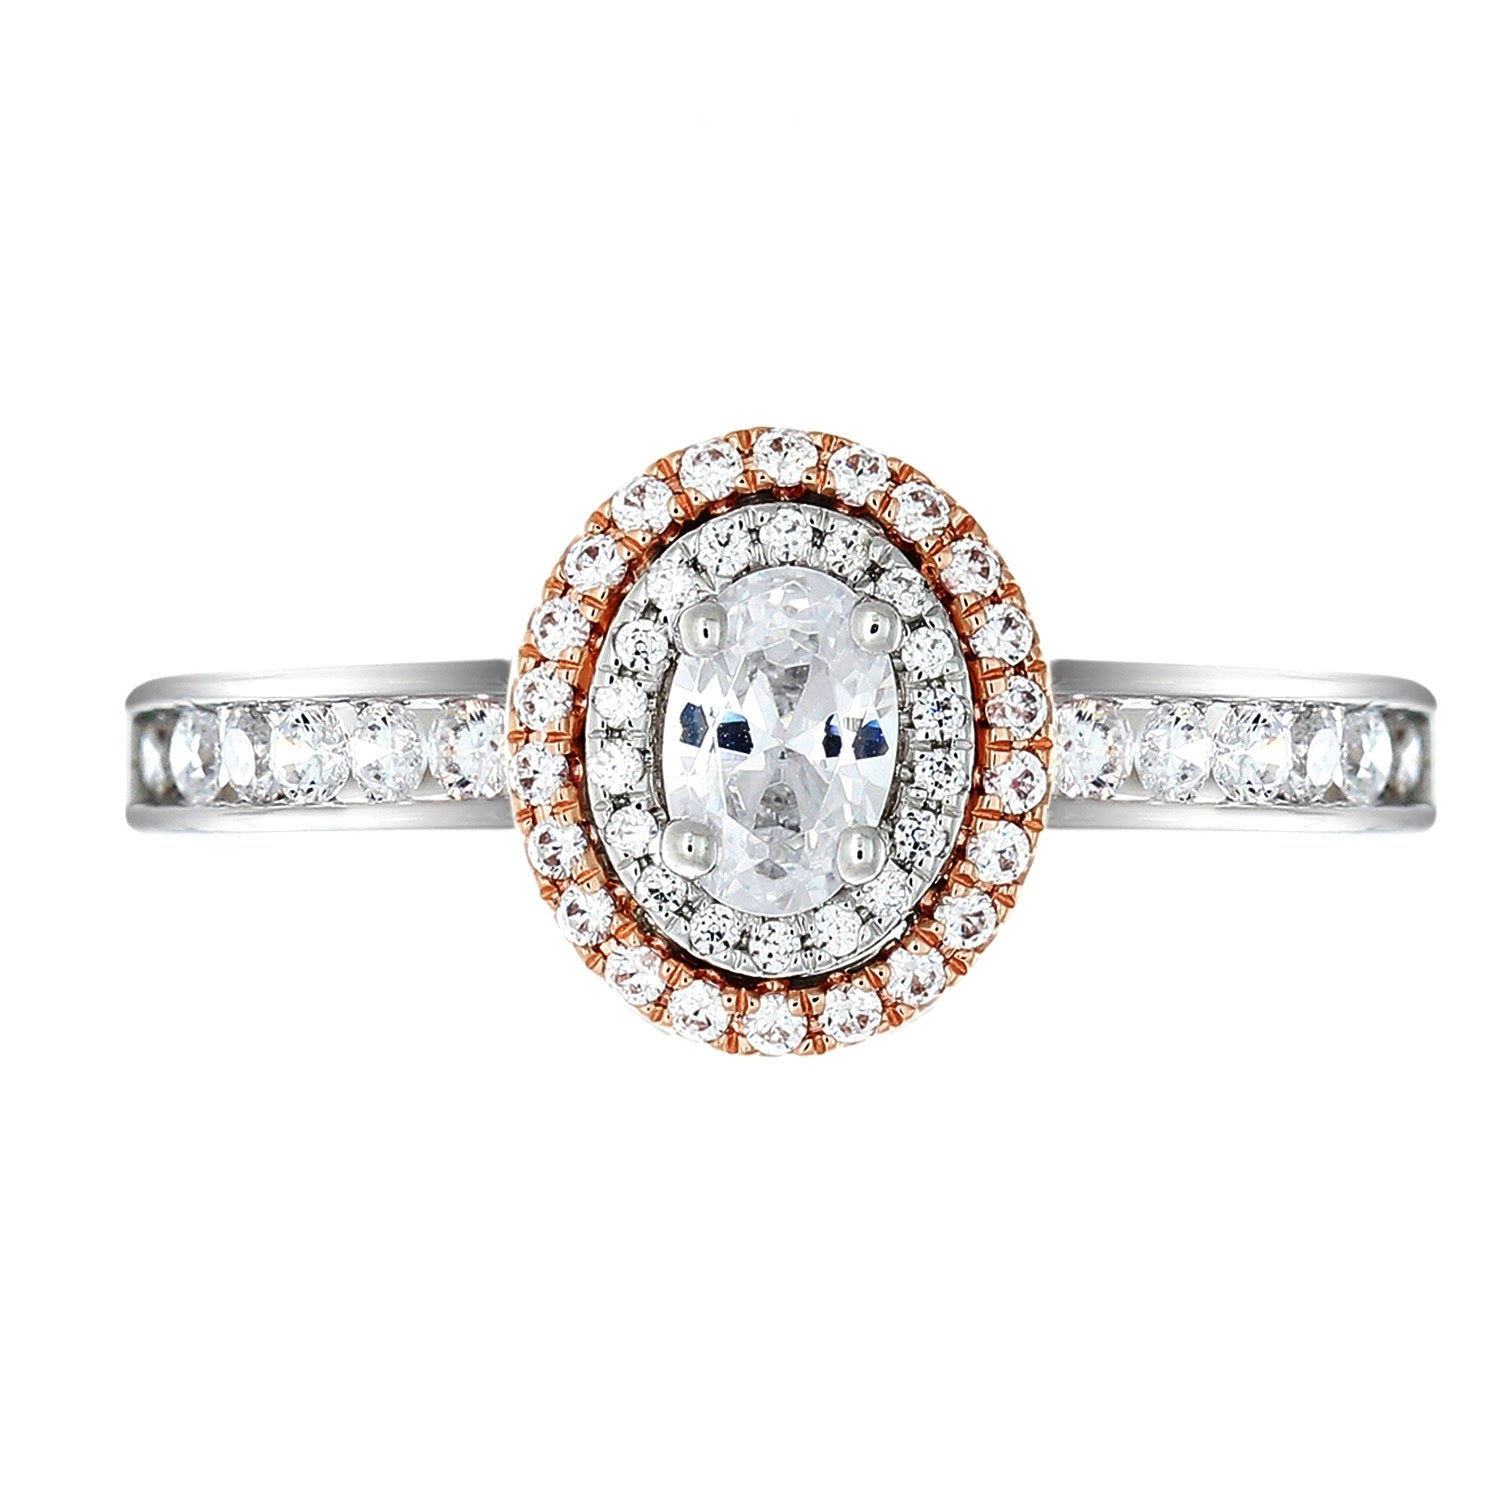 Rose Double Halo Diamond Engagement Ring made in 14k white and Rose gold-Oval